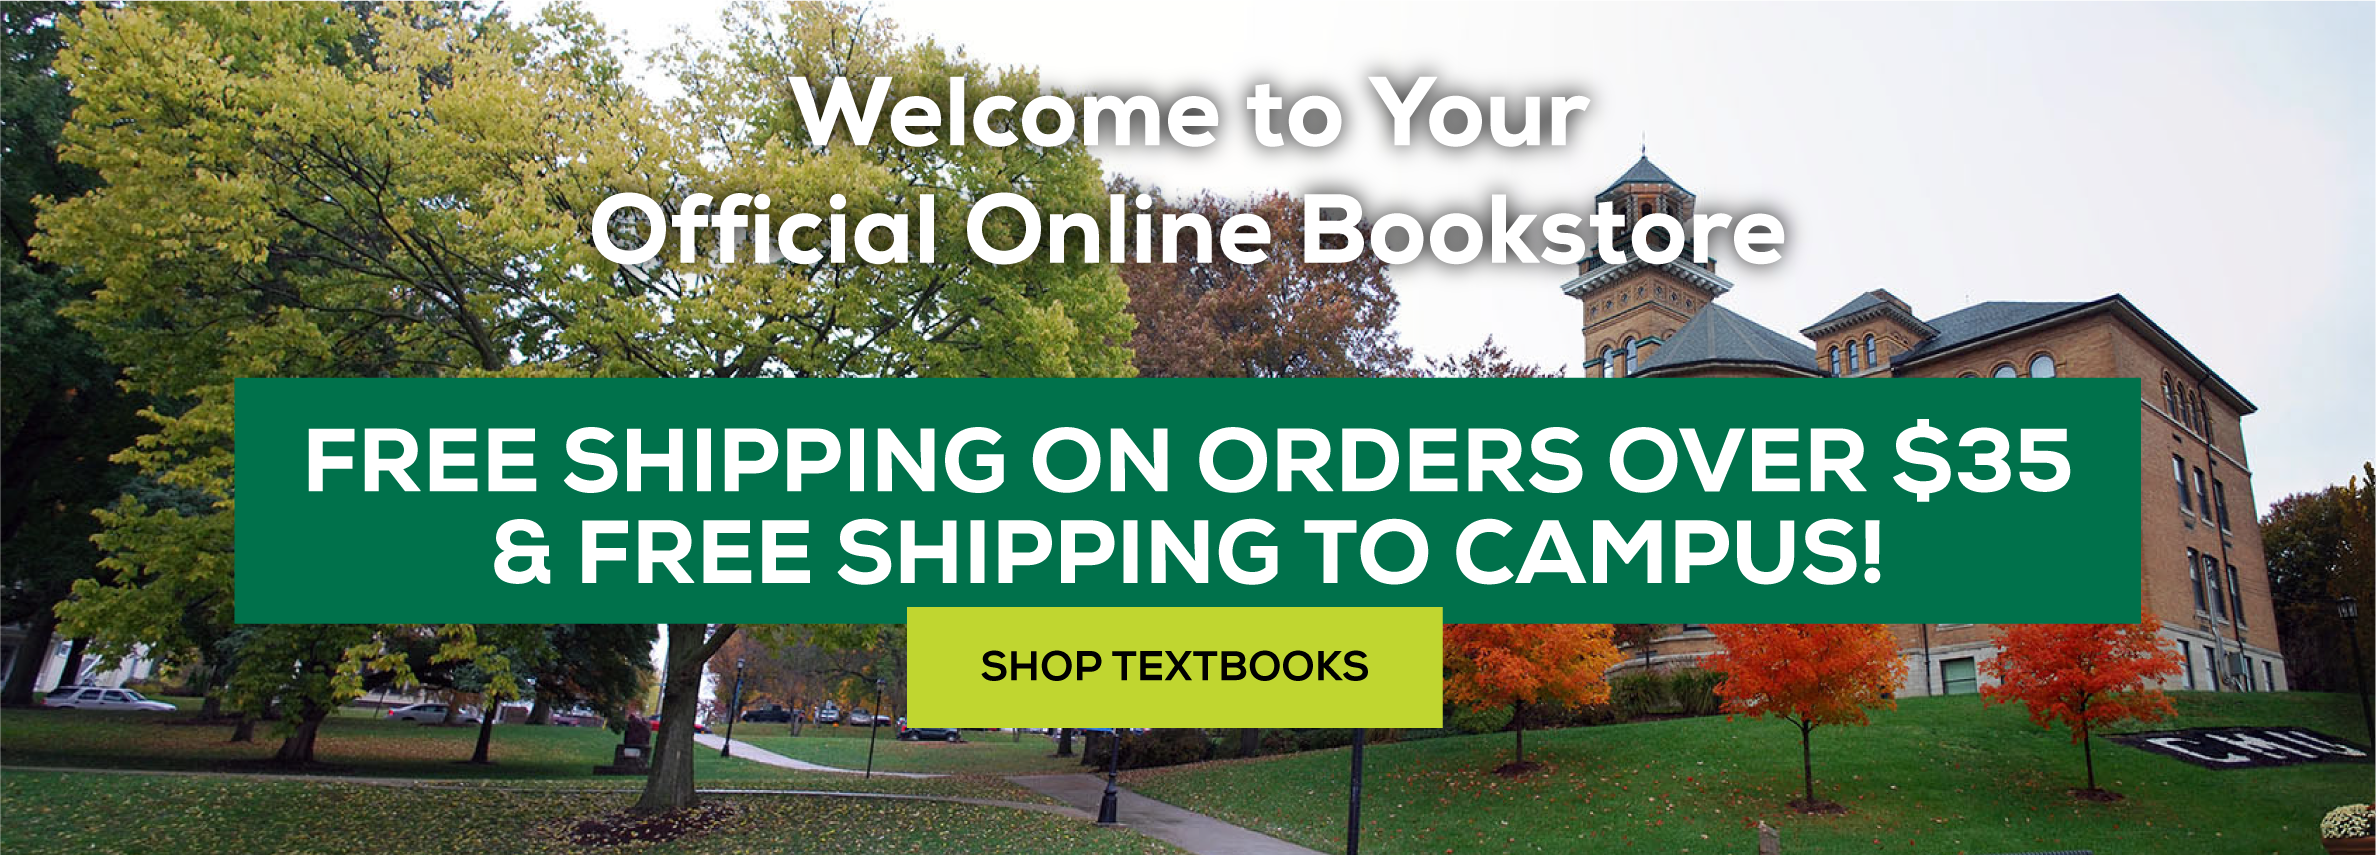 Welcome to your official online bookstore. Free shipping on all orders over $35 and free shipping to campus! Shop textbooks.